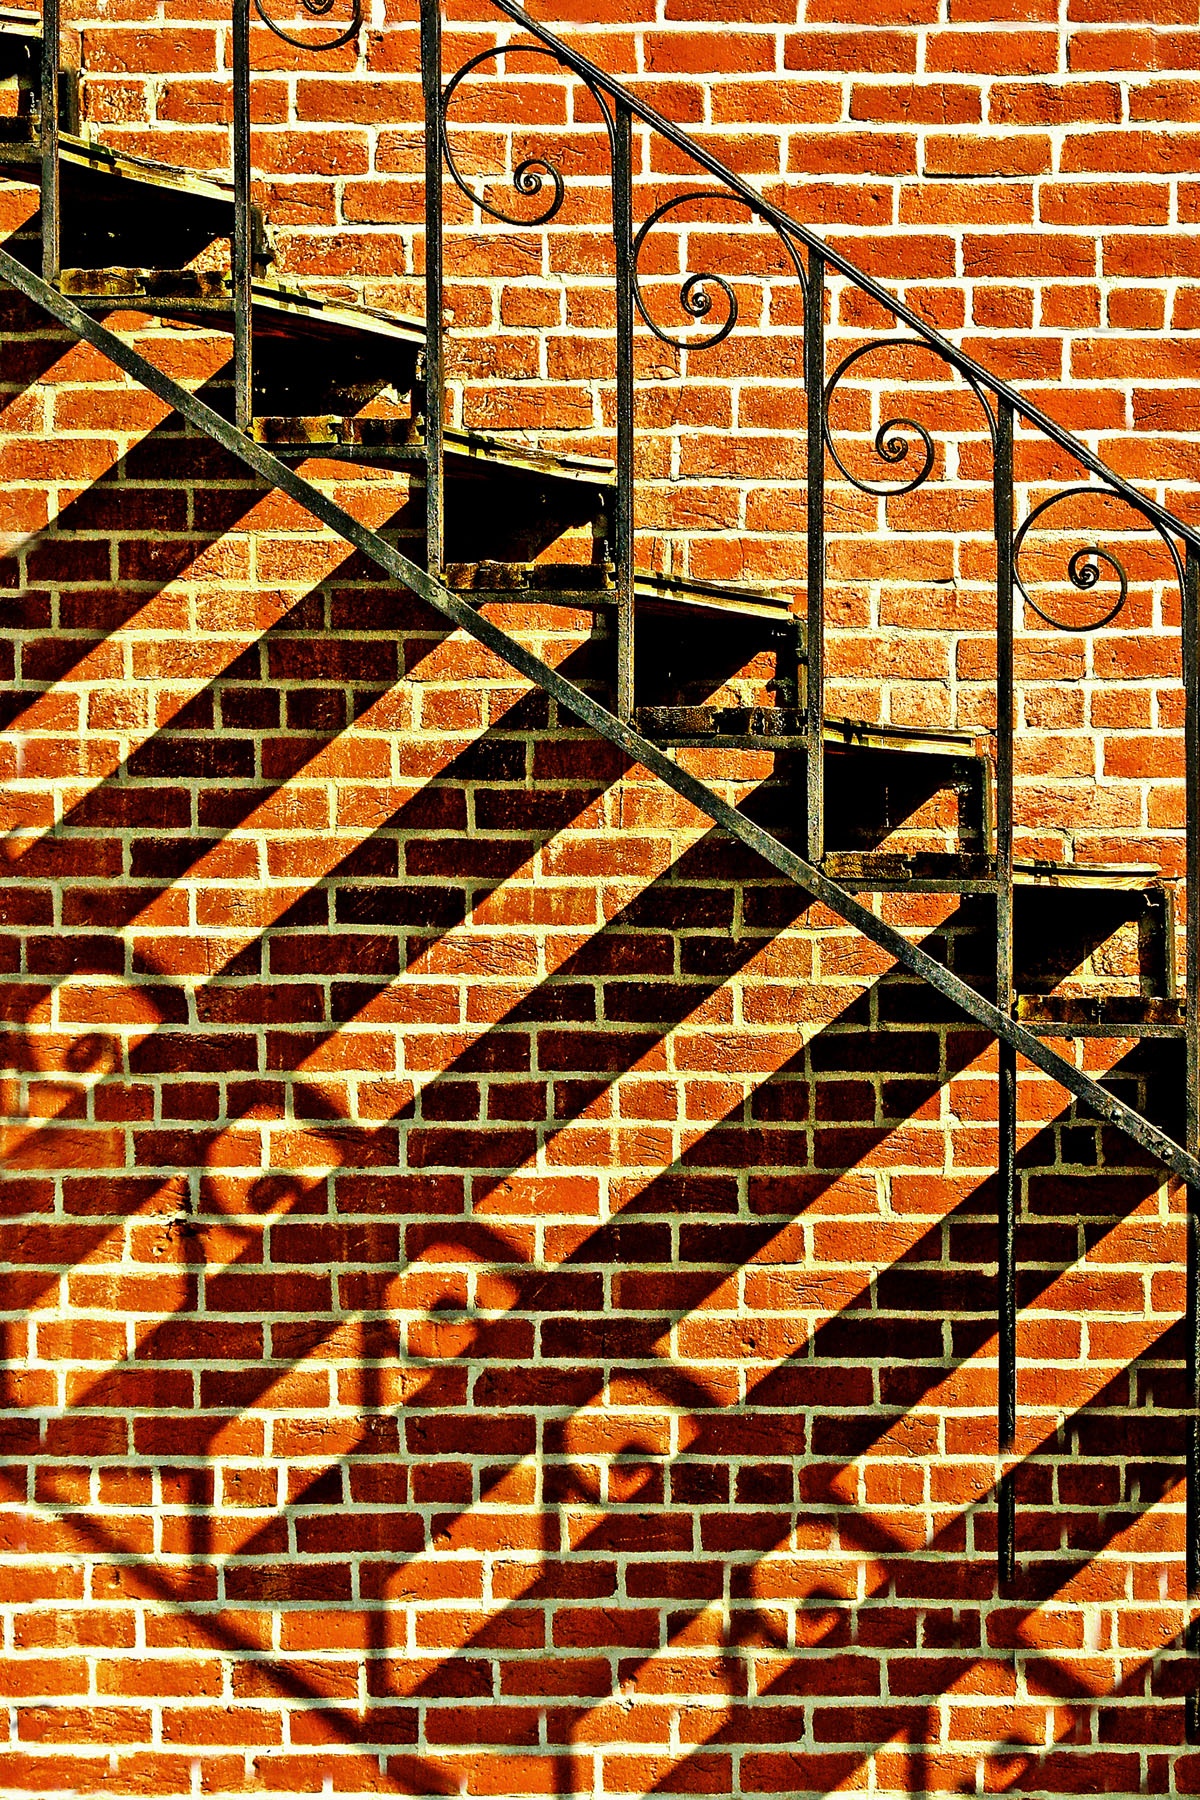 SHADOWS ON THE WALL - Sometimes you get a photo just because you are at the right place at the right time. I was just walking around a small town looking for a photograph, and this was there. It’s one of my favorites.